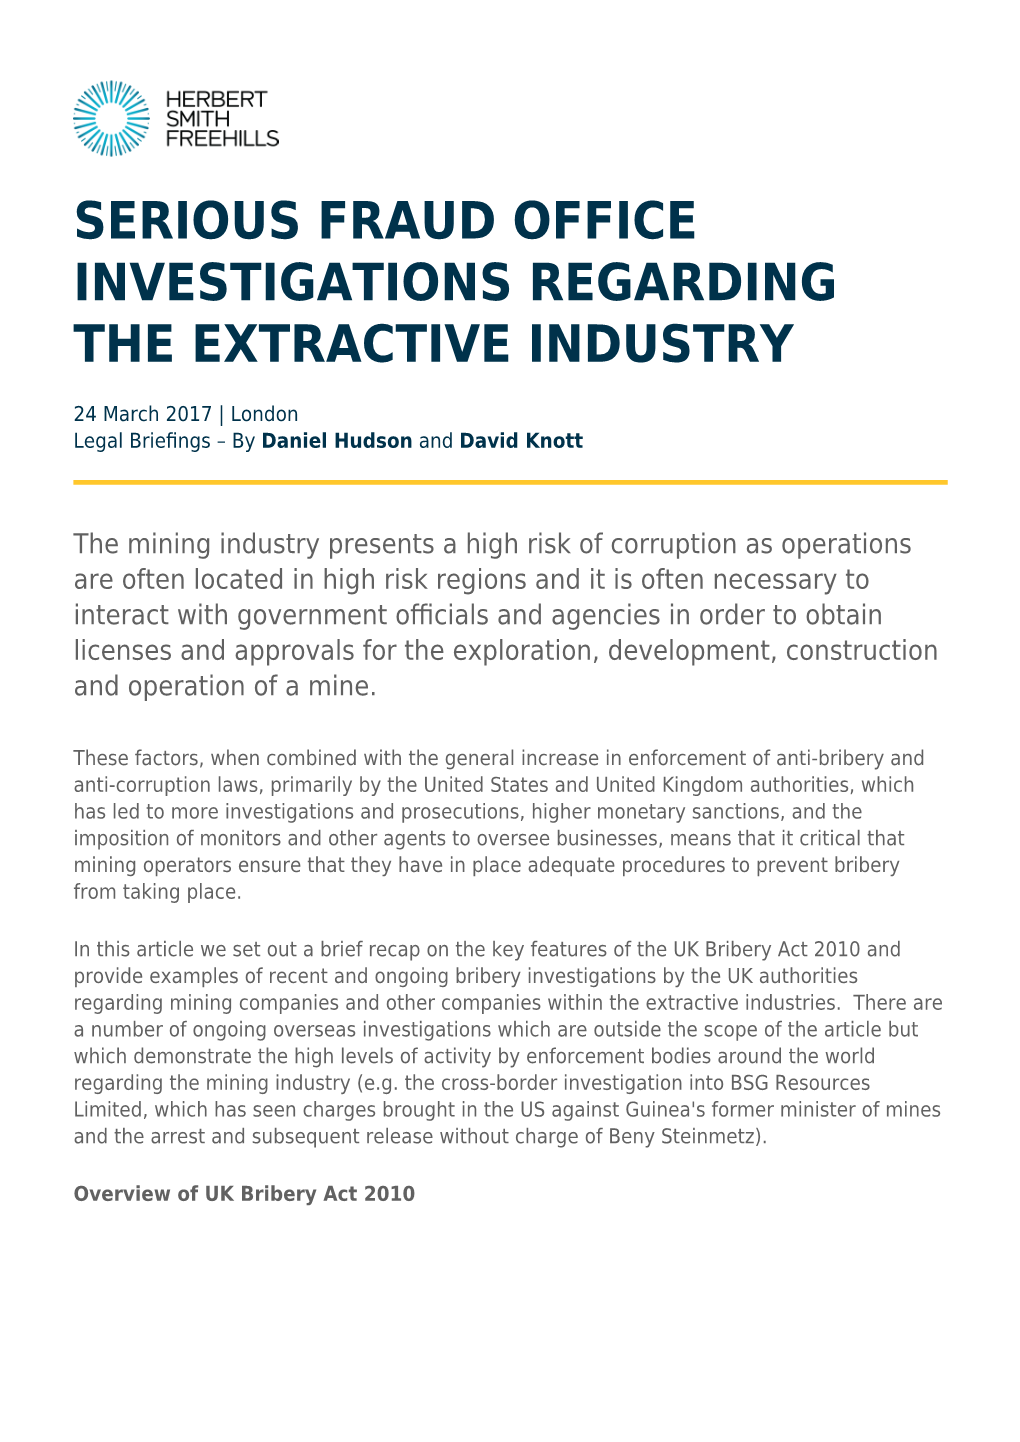 Serious Fraud Office Investigations Regarding the Extractive Industry